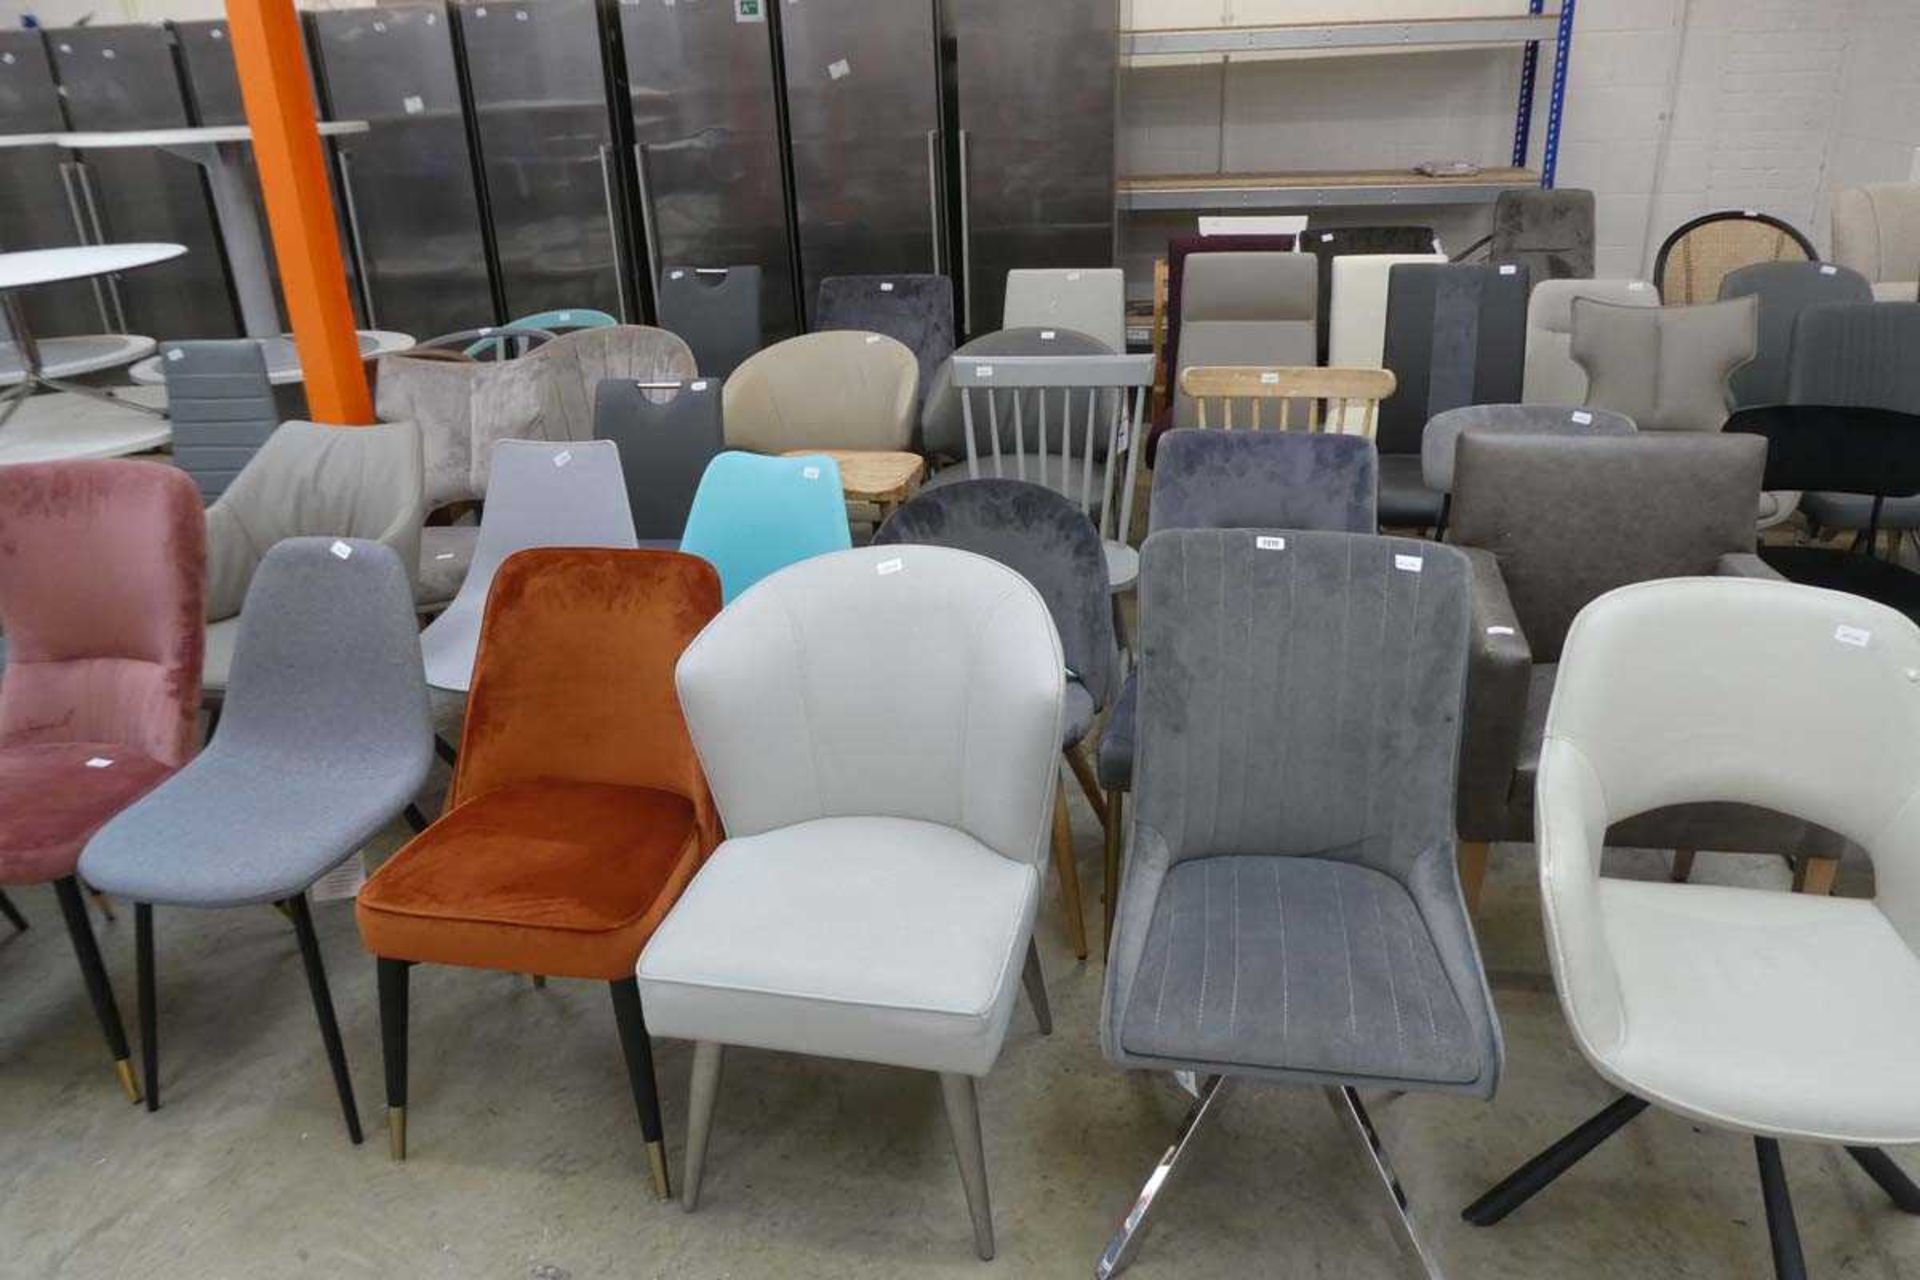 48 chairs in various forms, styles and colours